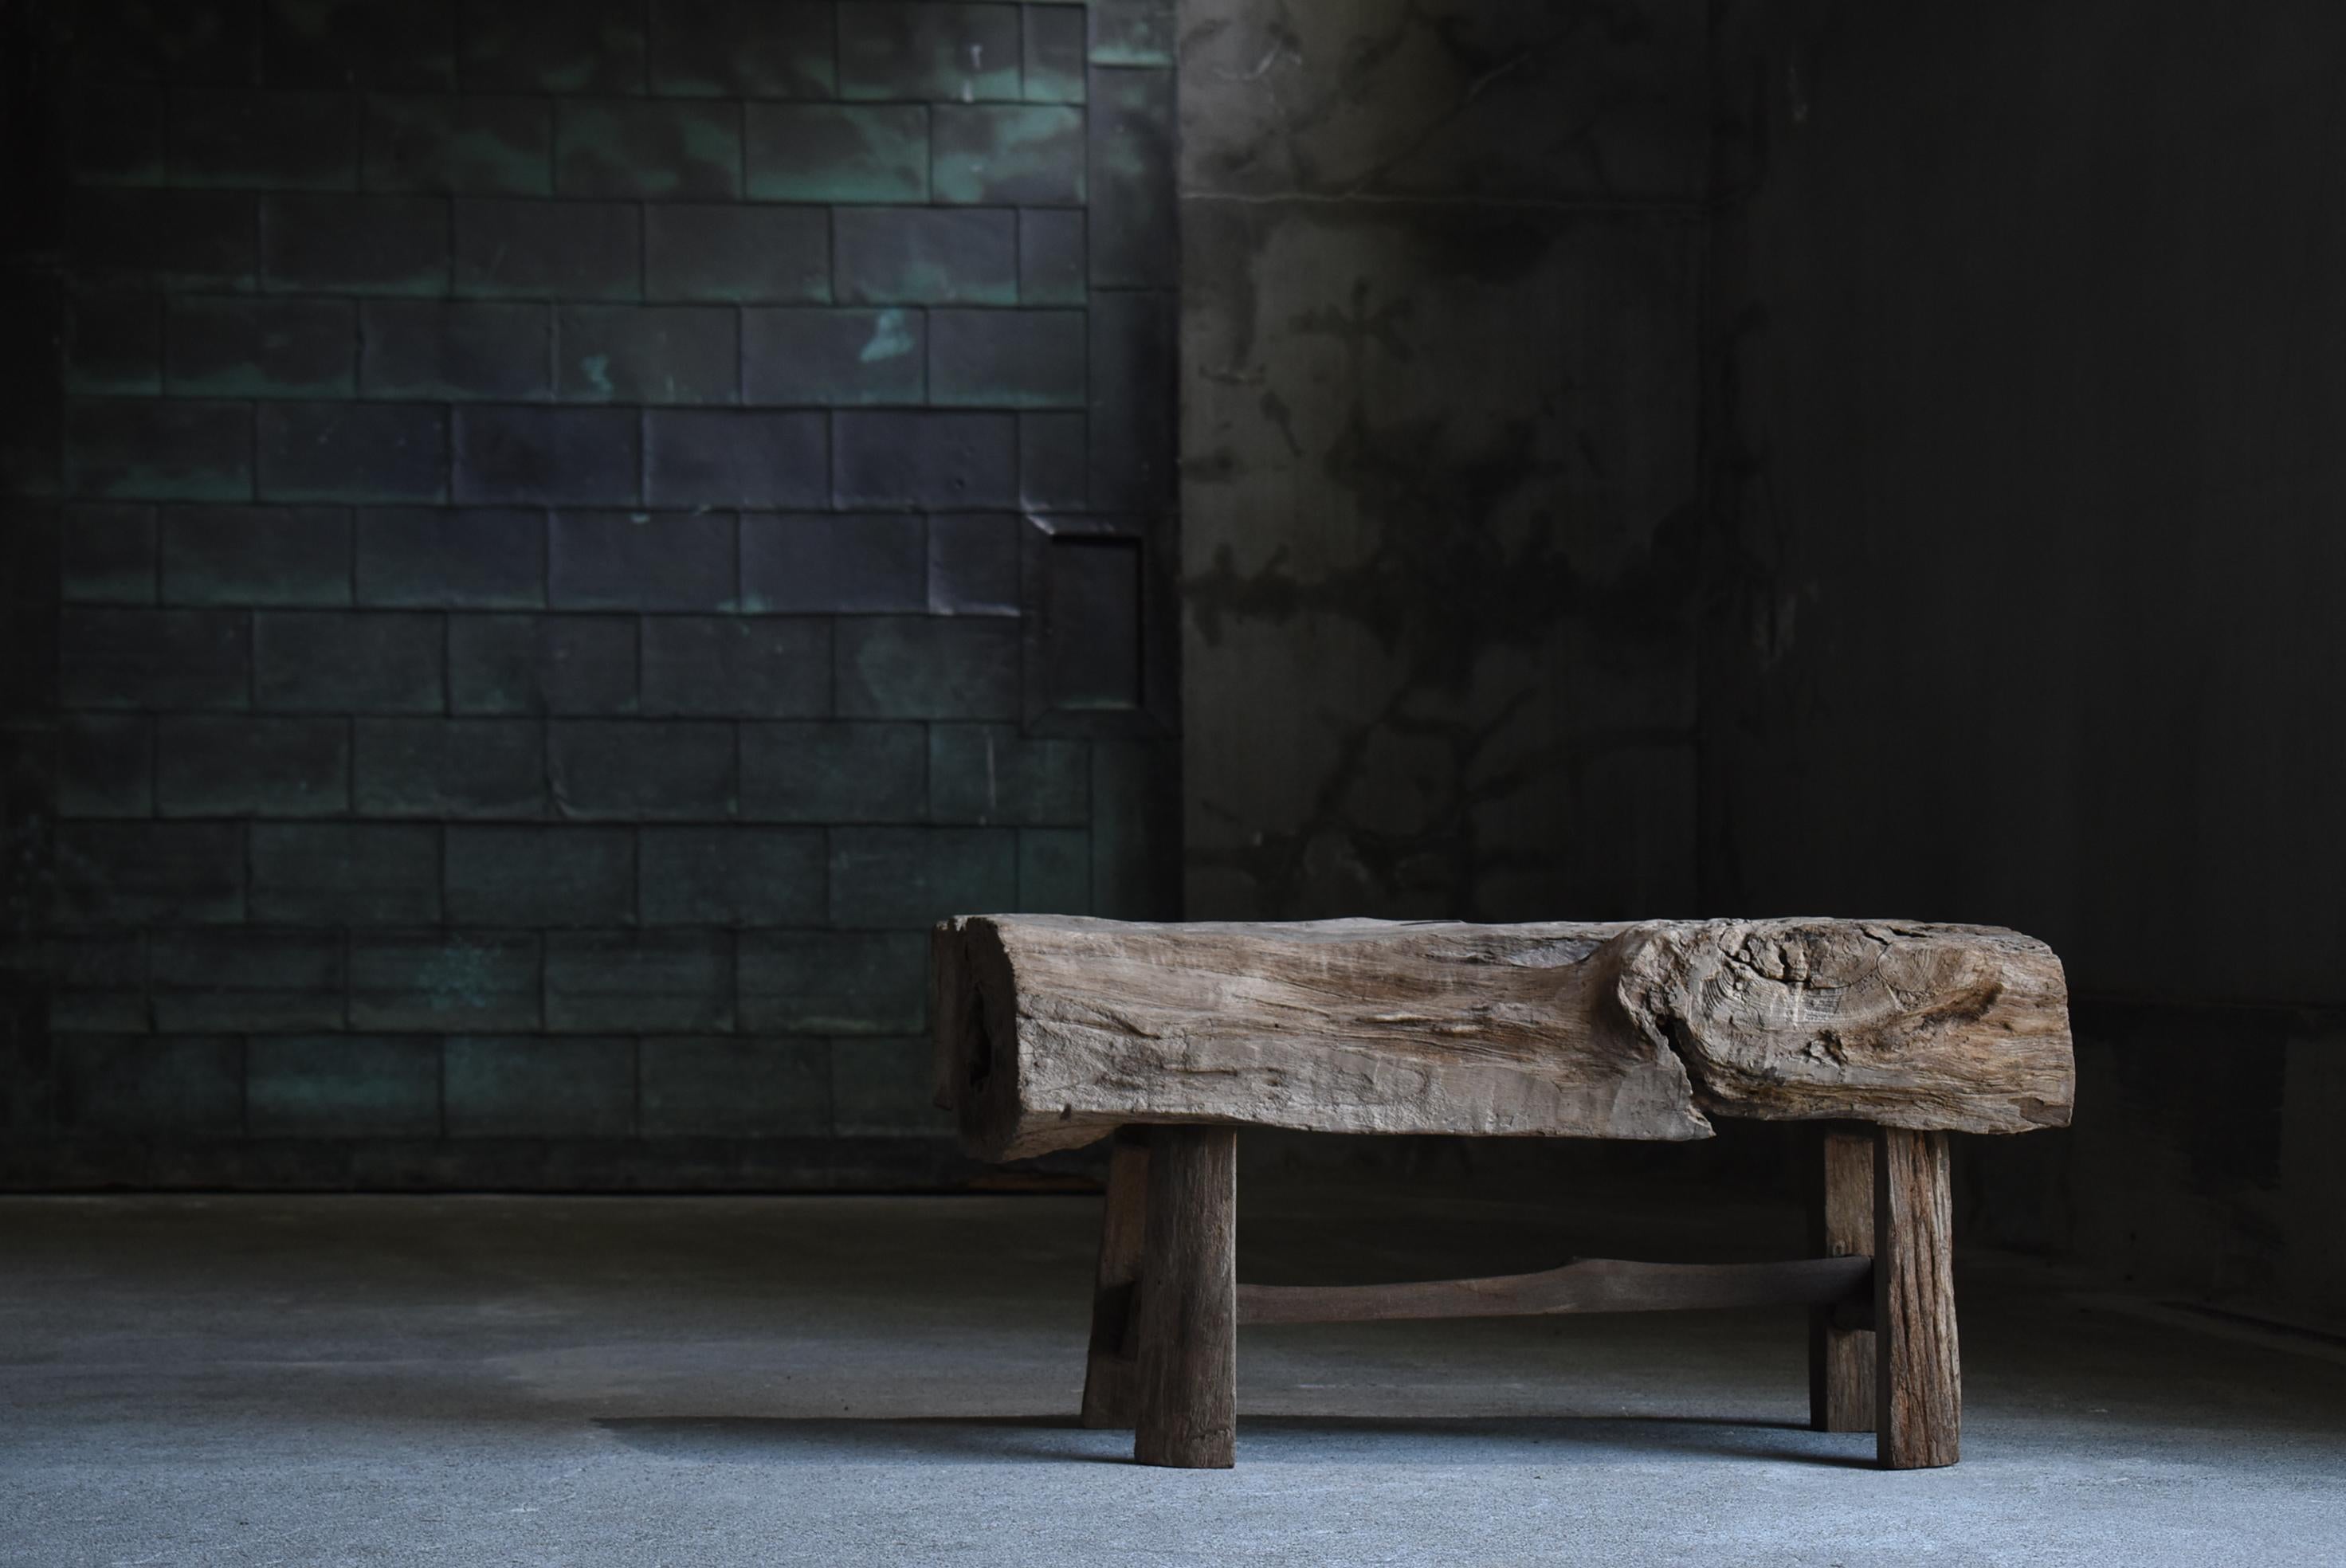 This is a very old primitive style bench.
We estimate the age to be furniture from the 1860s-1900s.
The material is teak wood.
The detailed country of production is unknown, but we assume the furniture is from Indonesia based on the material.

The